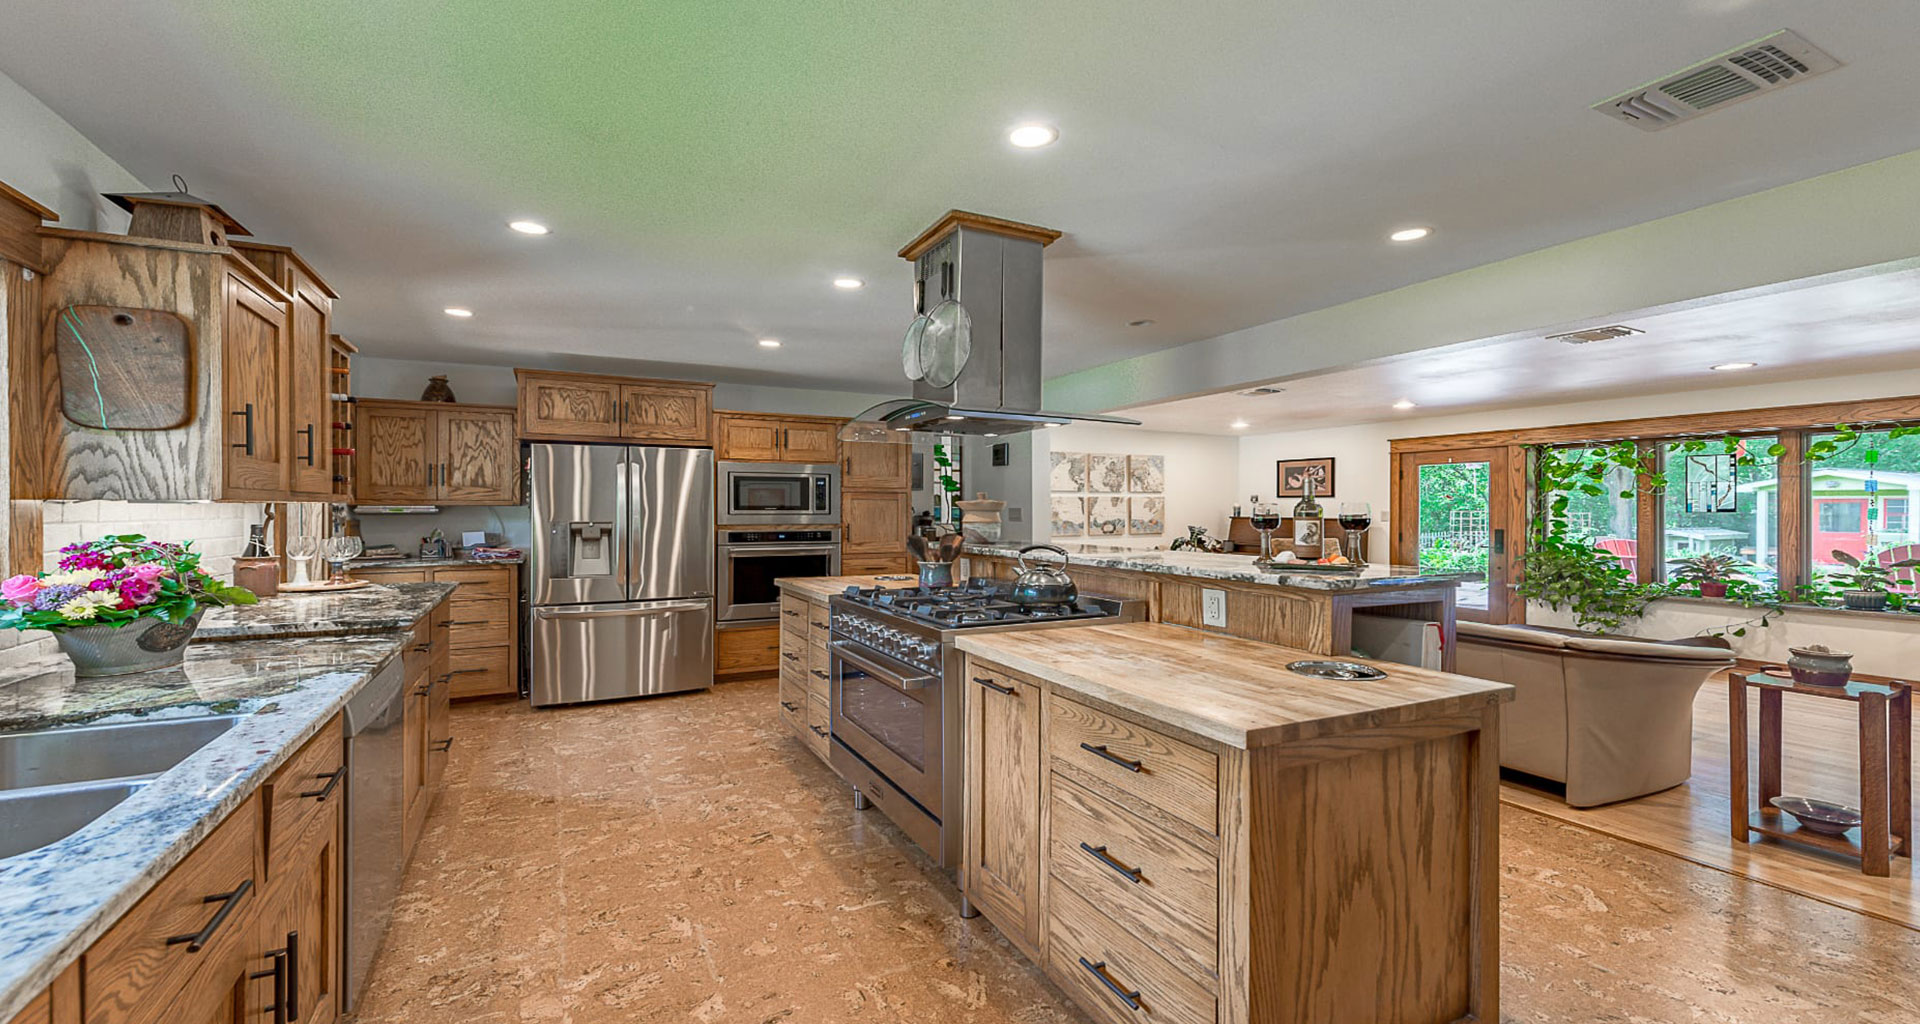 Kitchen Remodeling in Texas